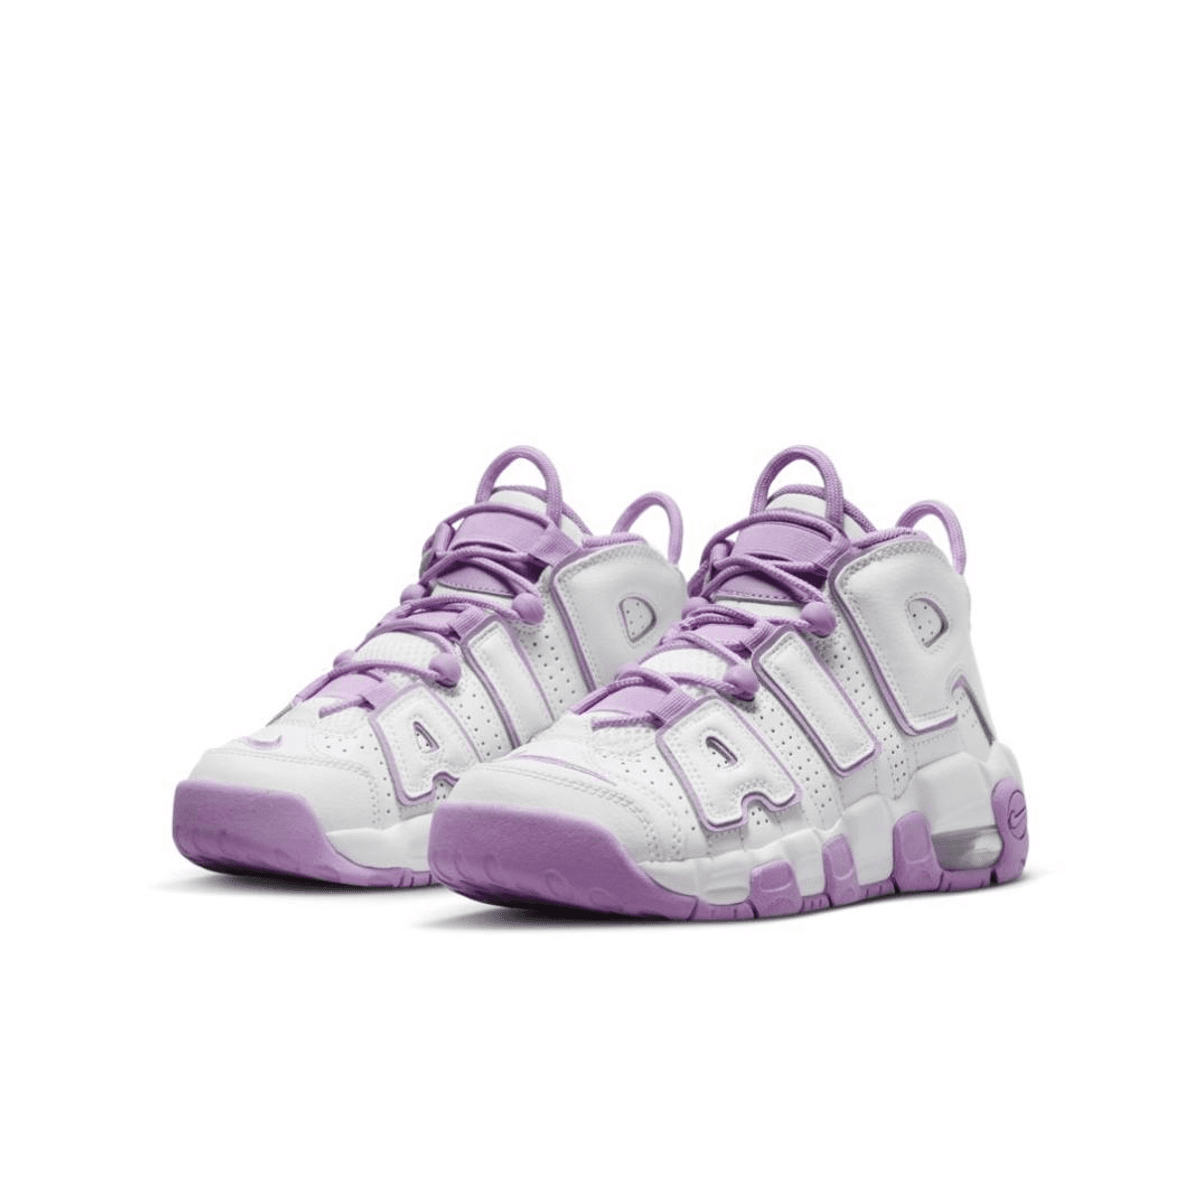 Nike Is Cooking Up A Summer Classic For The Kids With The Nike Air More Uptempo White/Lilac